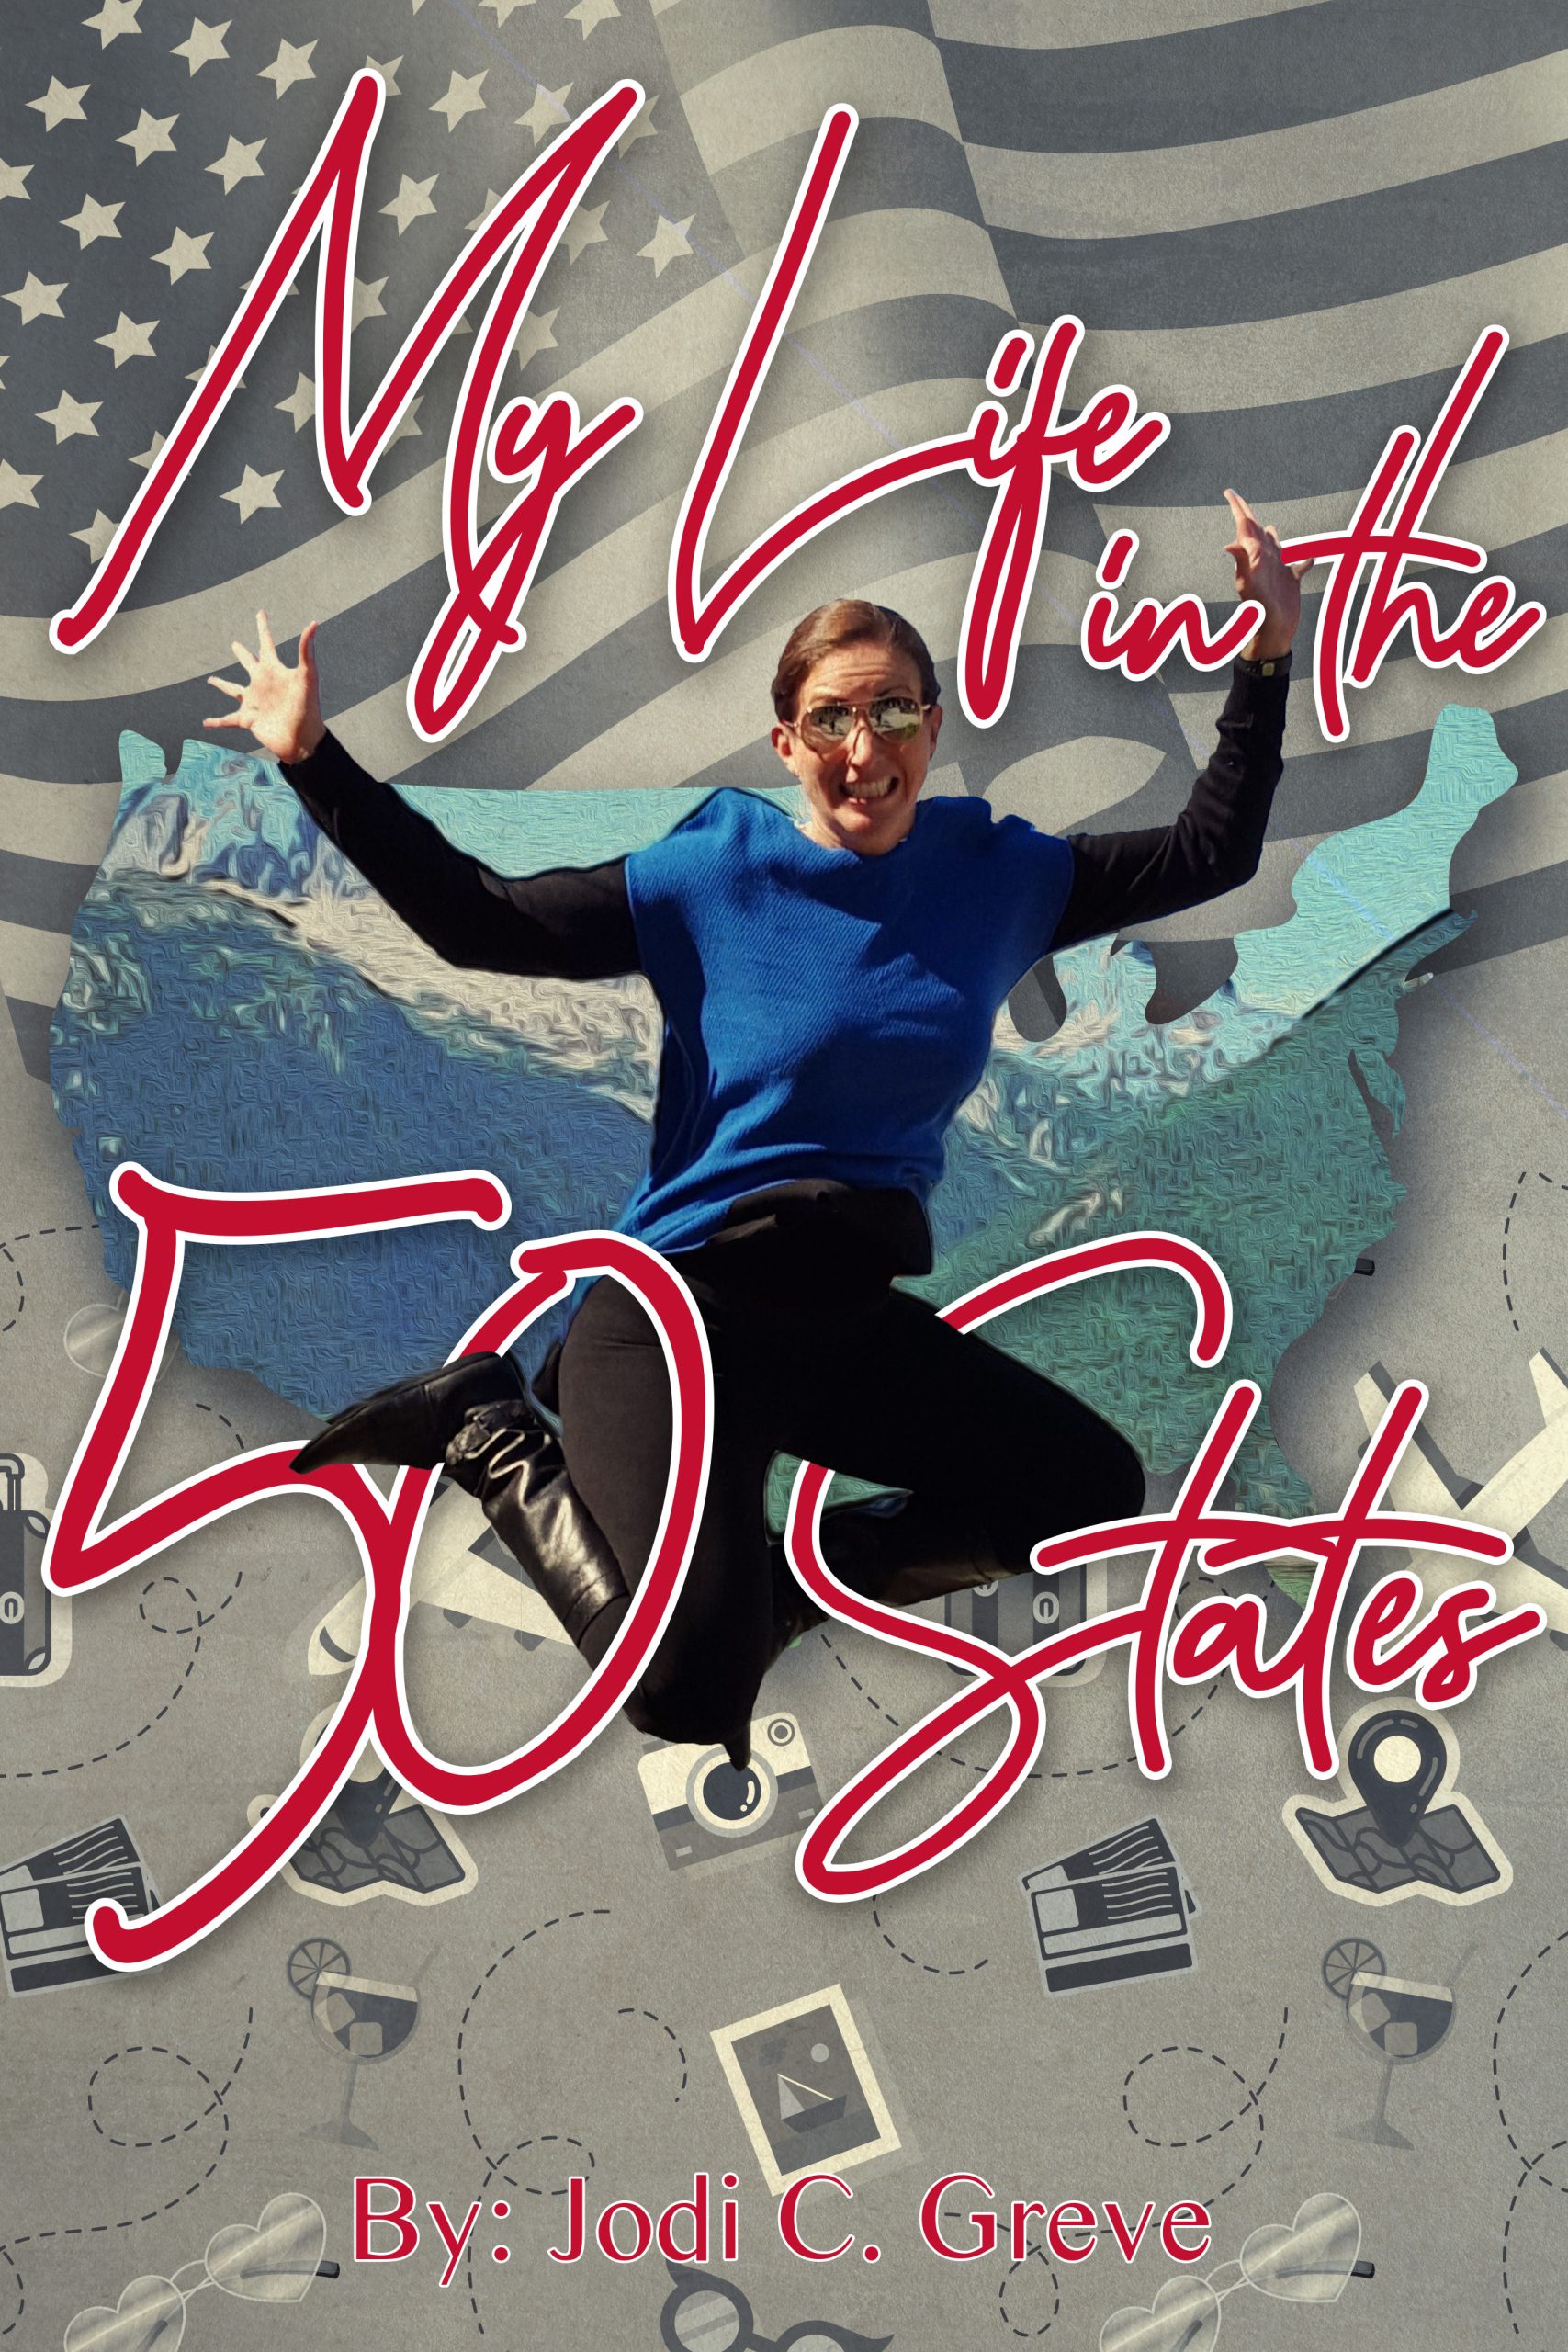 A quirky abstract cover. The American flag waves at the top and blends into a mishmash of travel illustrations that include things like sunglasses, martinis, and cameras. In the middle is the United States with an image of Jodi jumping. Her legs are entwined in the letters 50 STATES. Above her in a handwriting font are the words MY LIFE IN THE. At the bottom in a sans-serif font are the words By: Jodi C. Greve